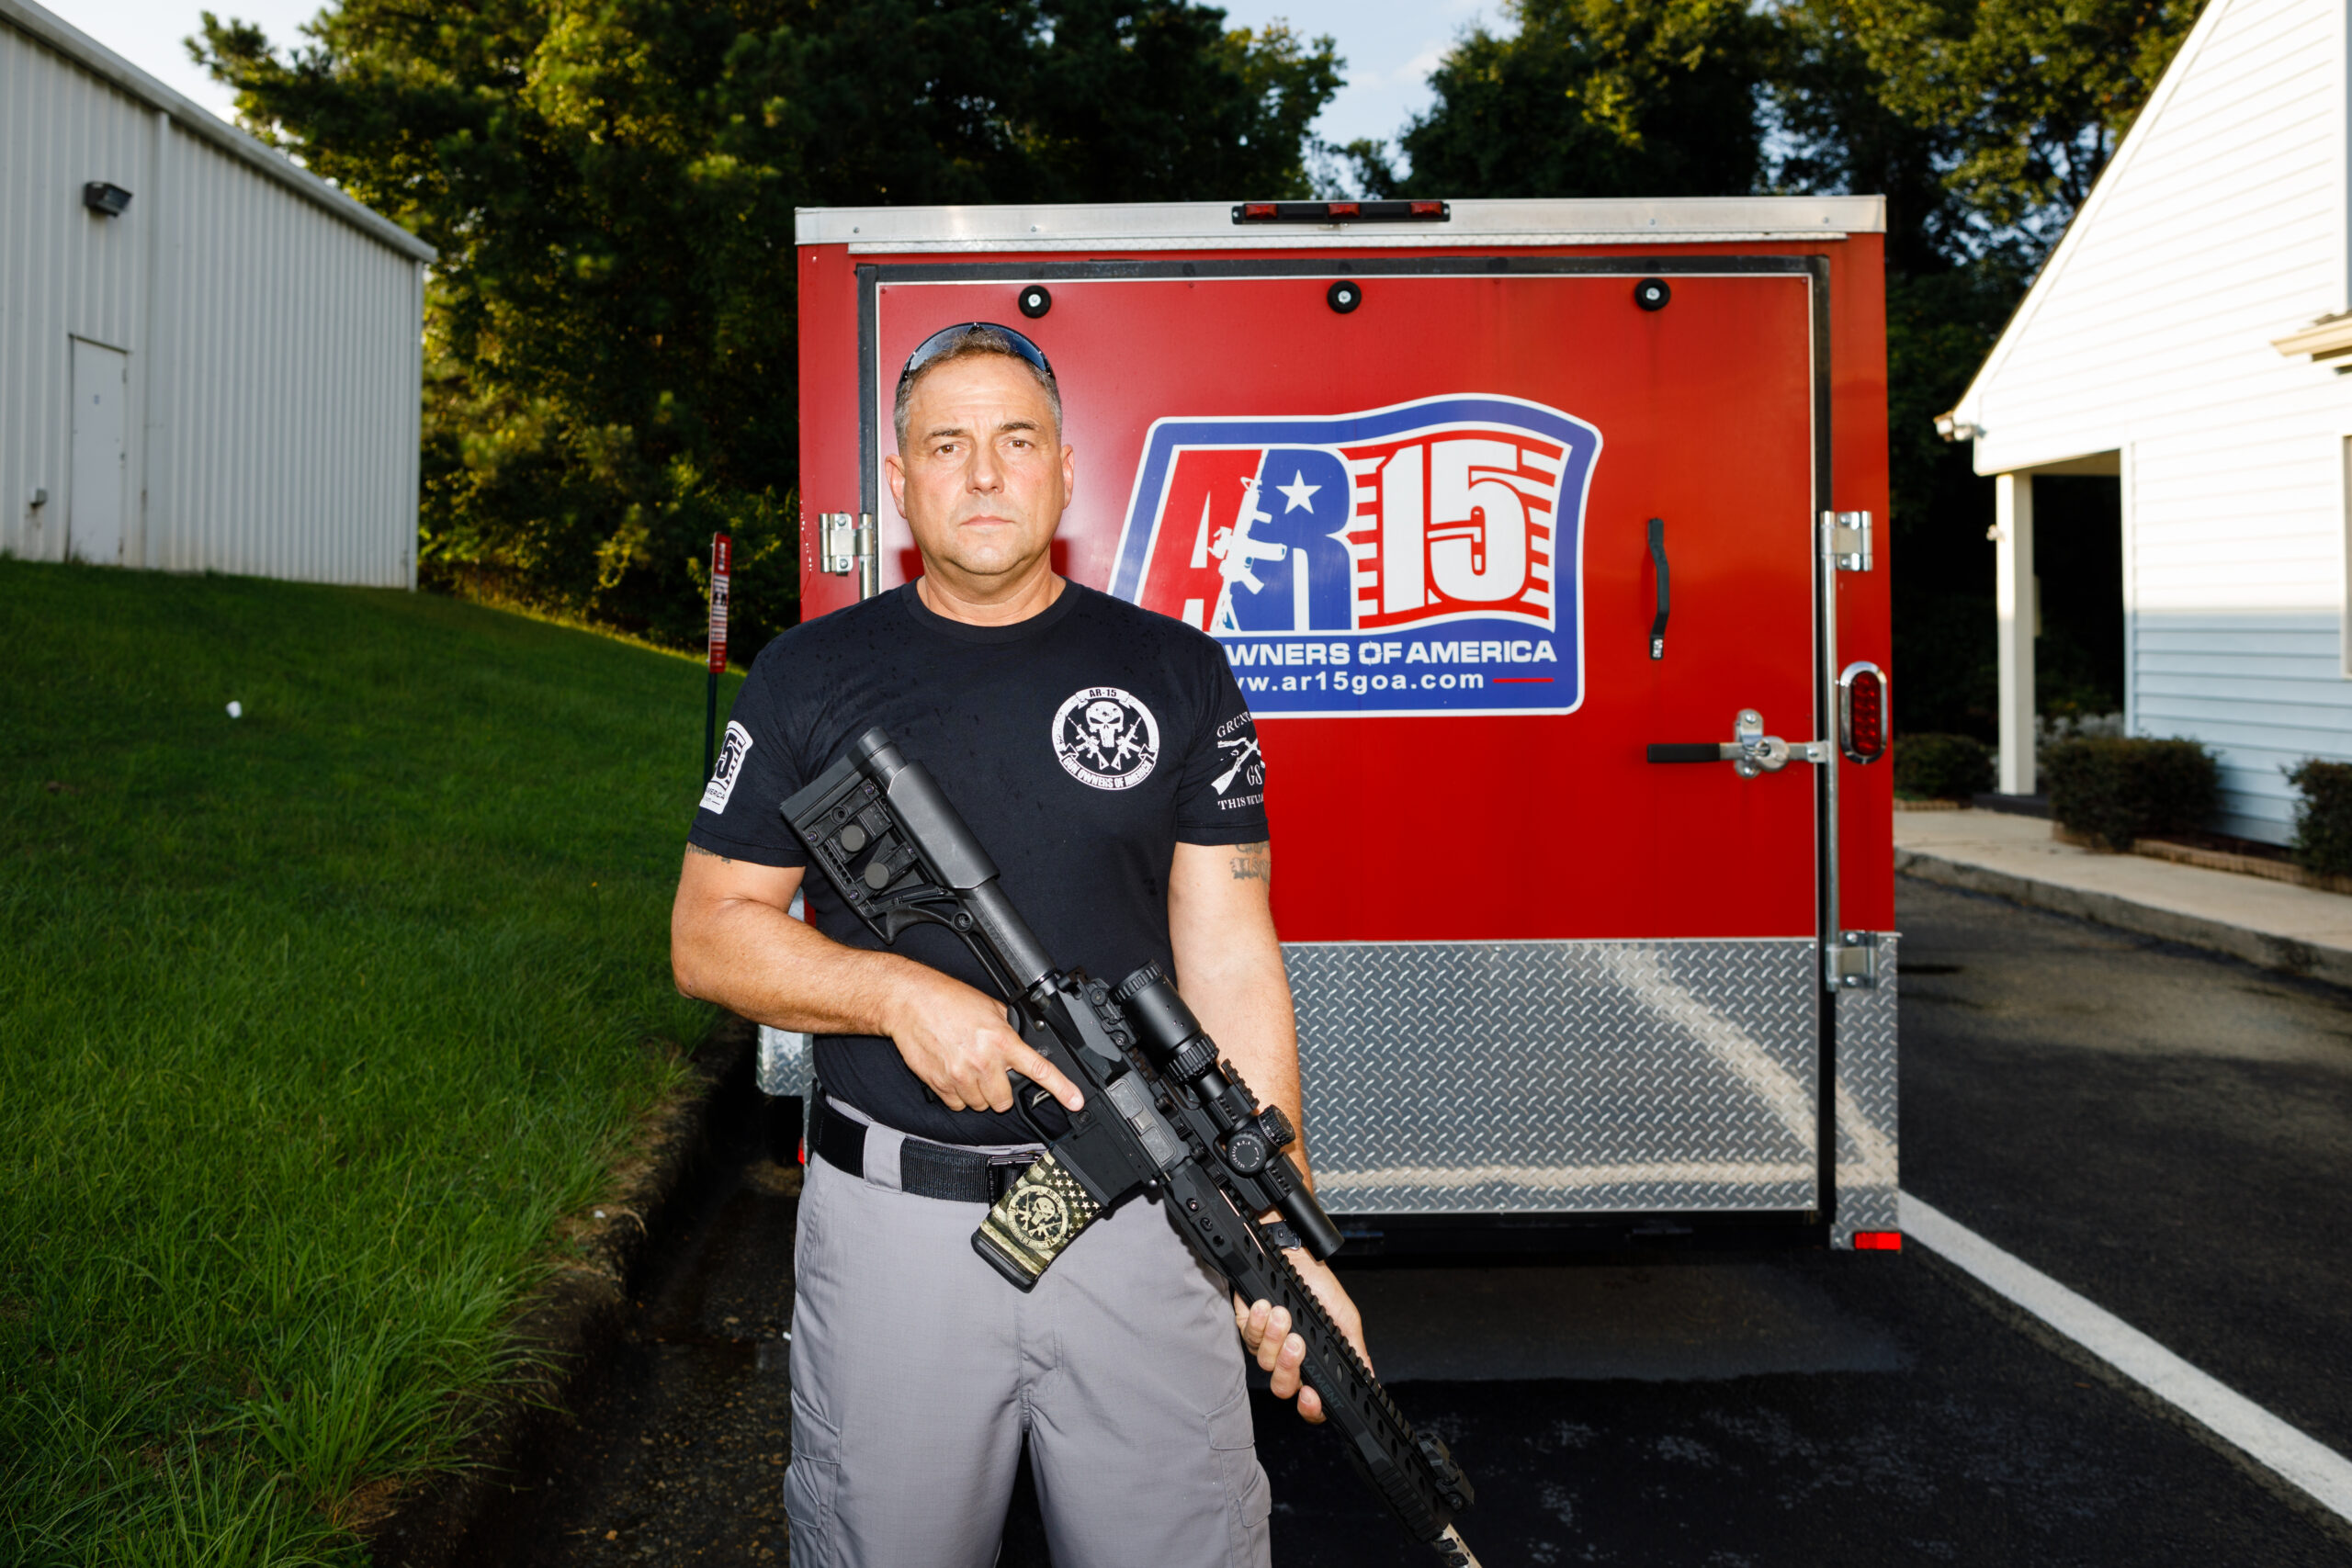 Portrait of Chris Waltz with his rifle in front of his trailer in the parking lot of his business AR-15 Gun Owners of America.